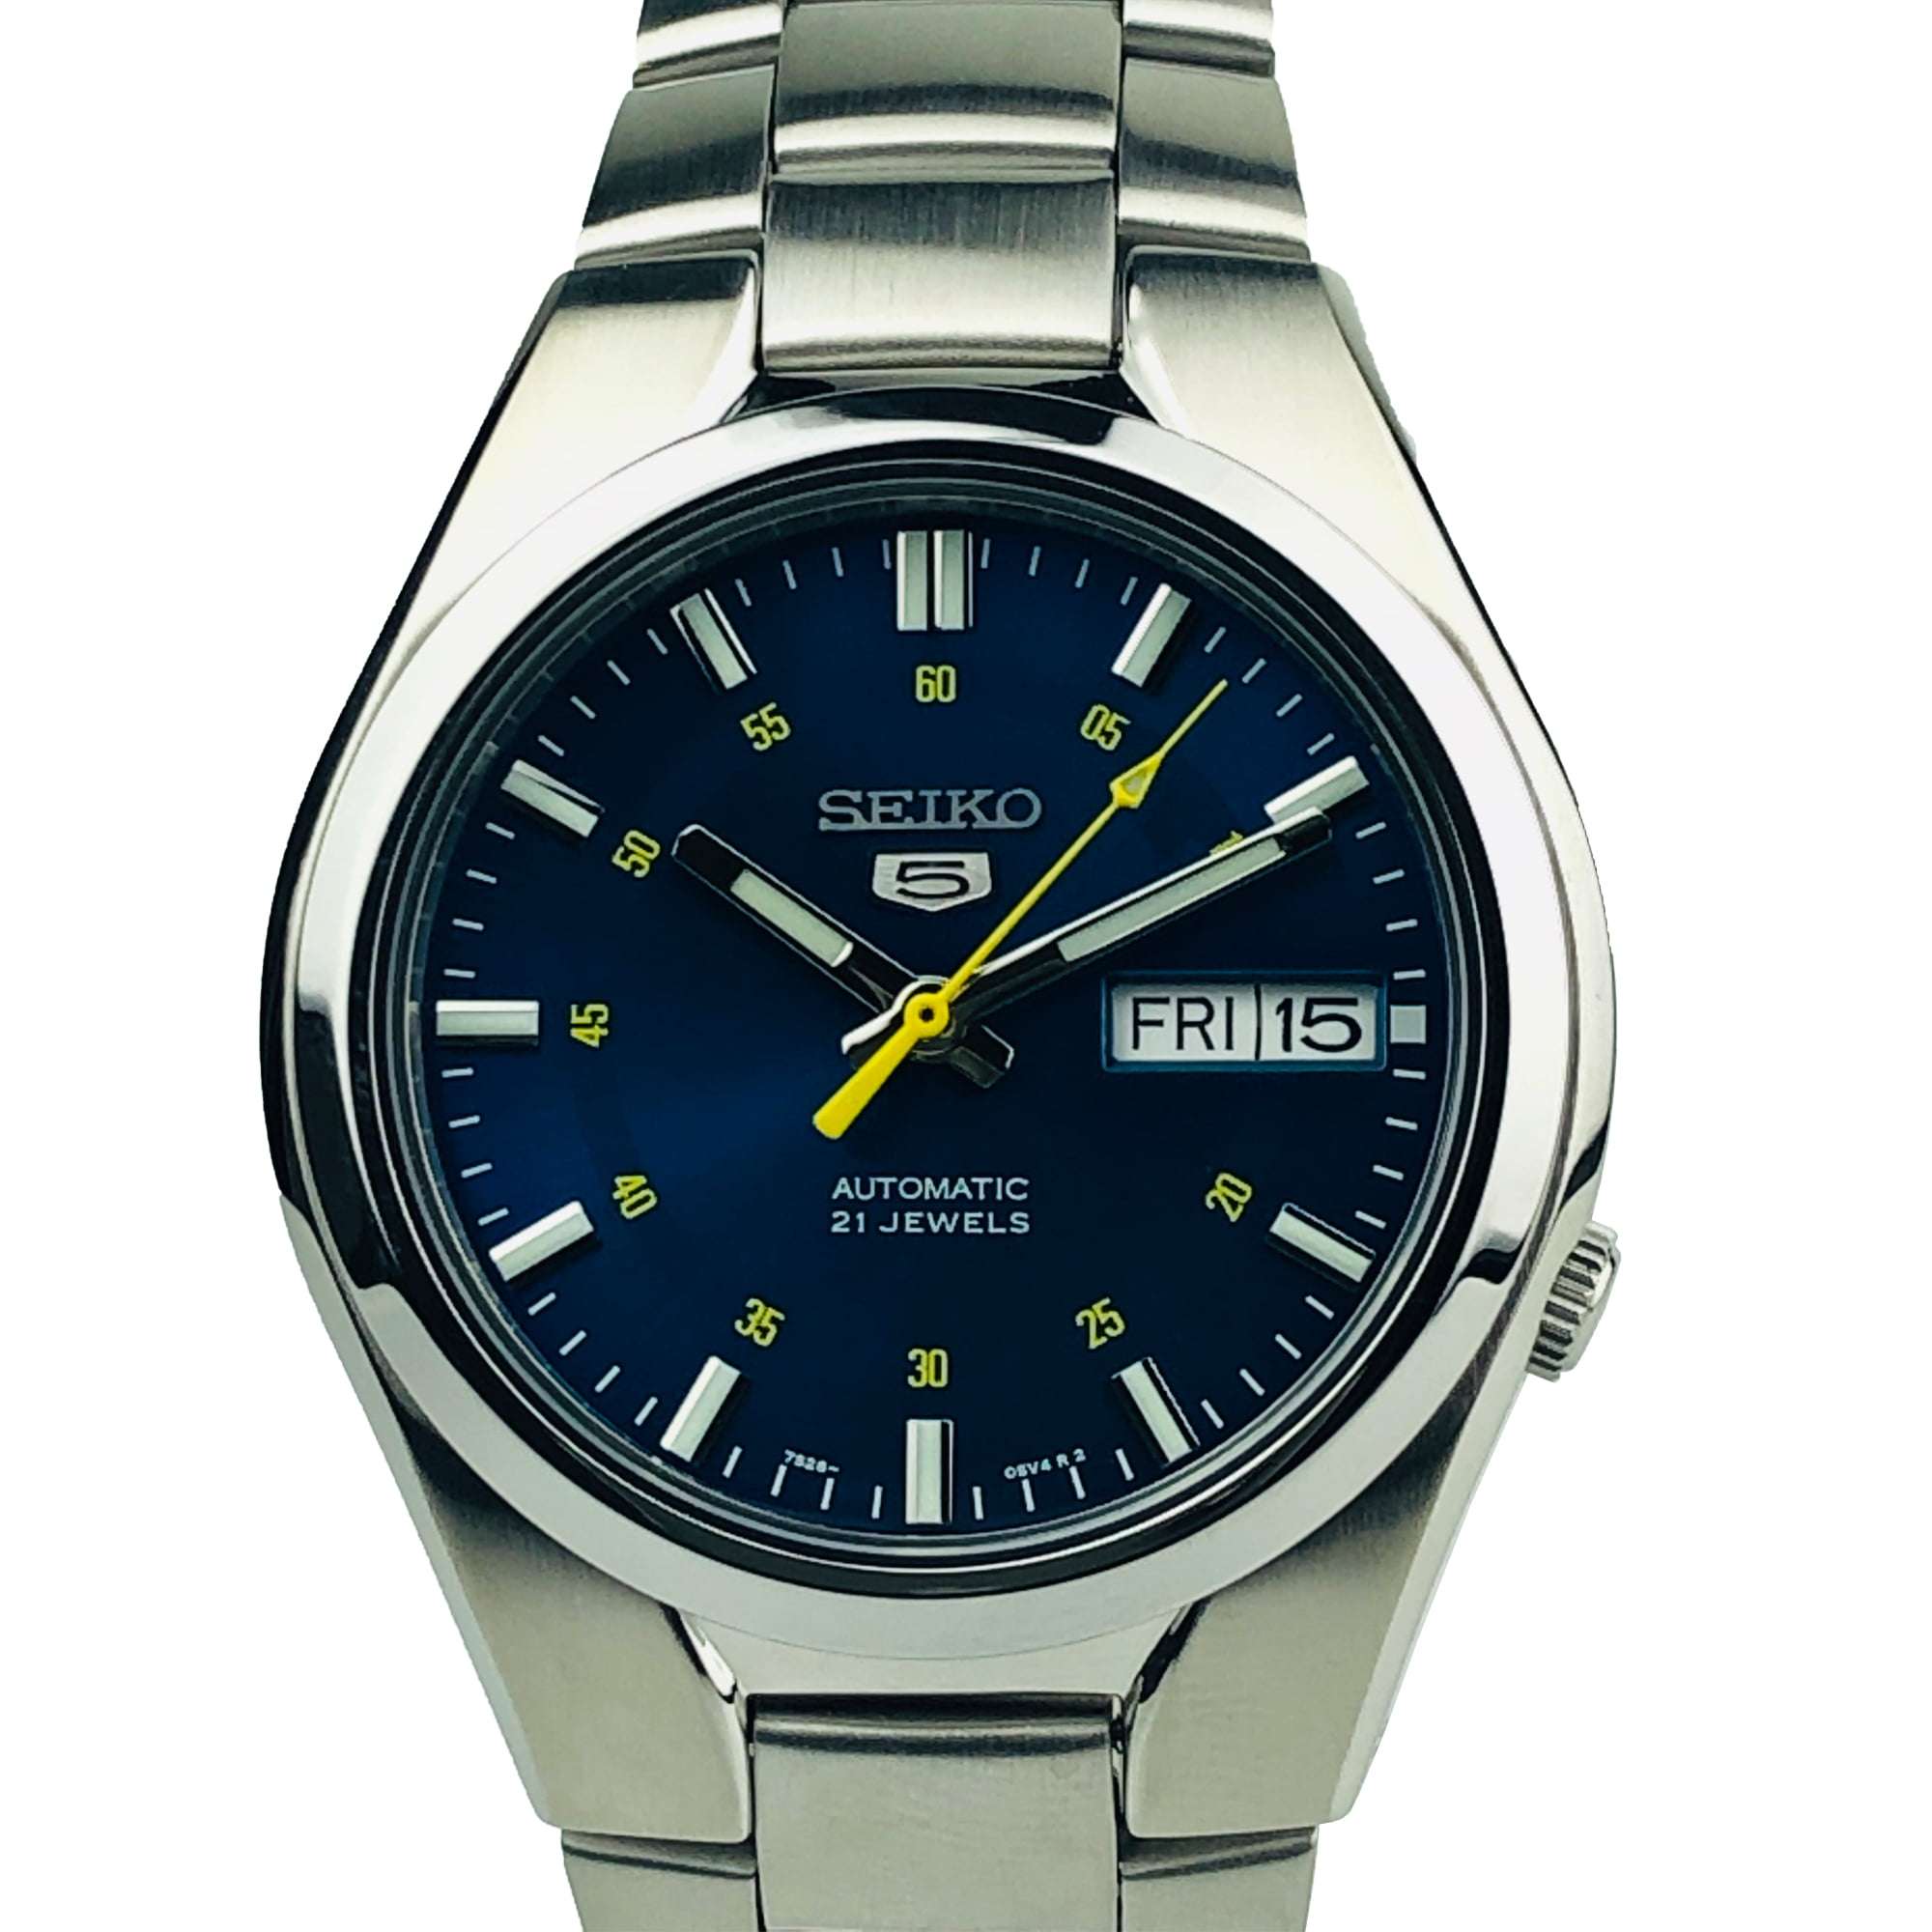 Seiko 5 Automatic Stainless Steel Blue Dial Men’s Watch (SNK615K1)